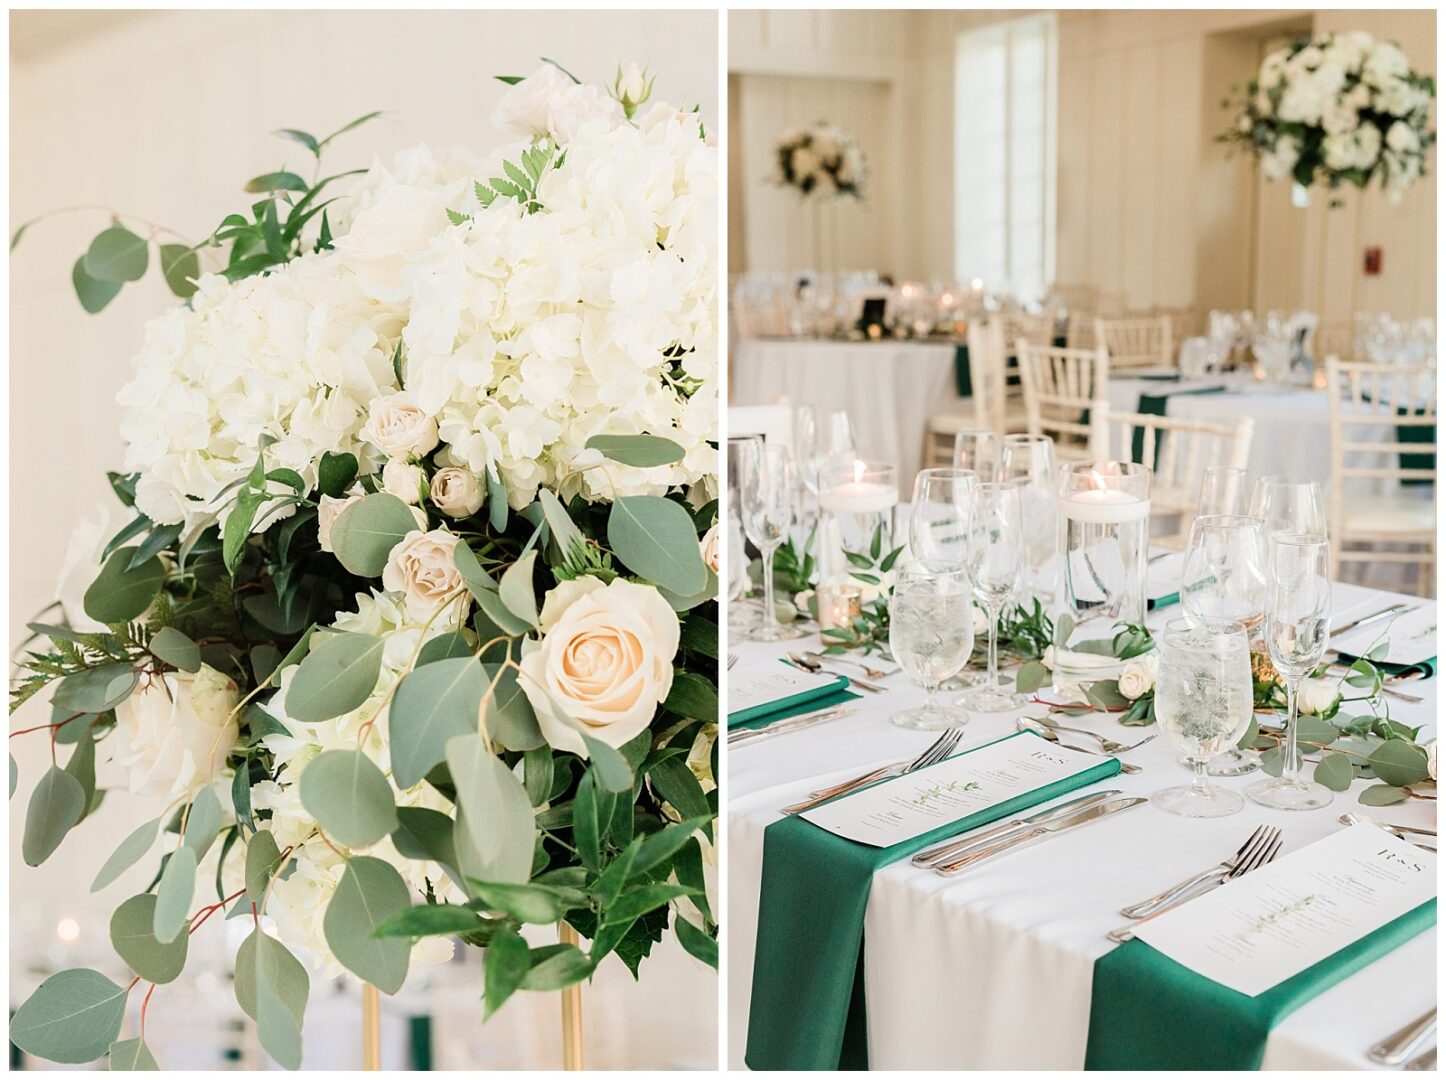 Gypsy Hill Florals & Event Design